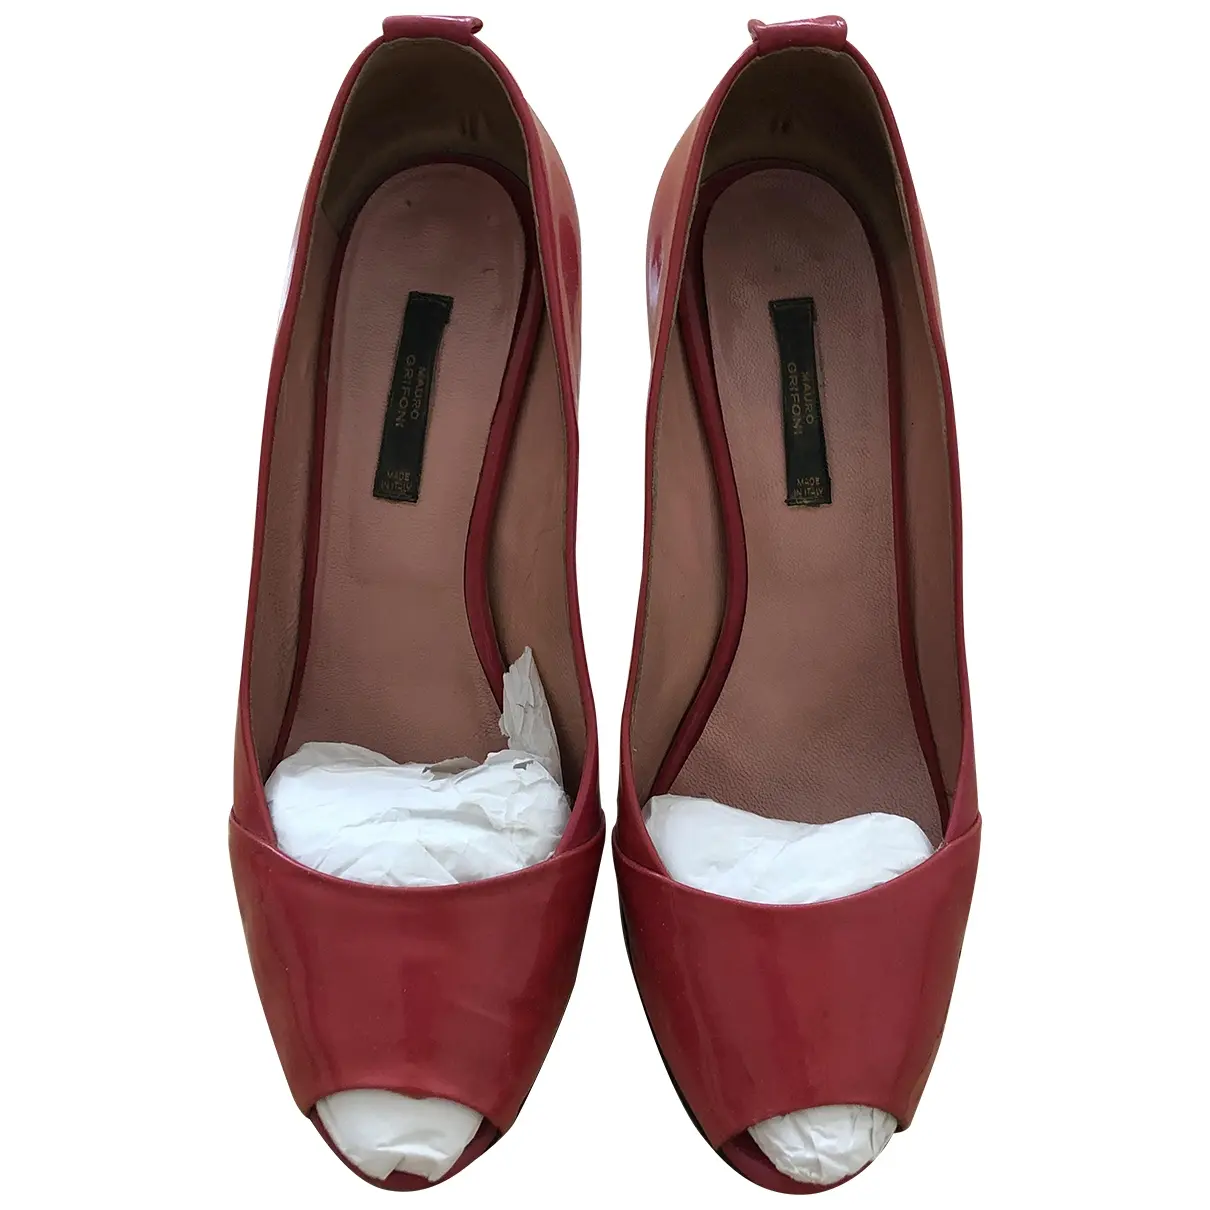 Patent leather heels Mauro Grifoni